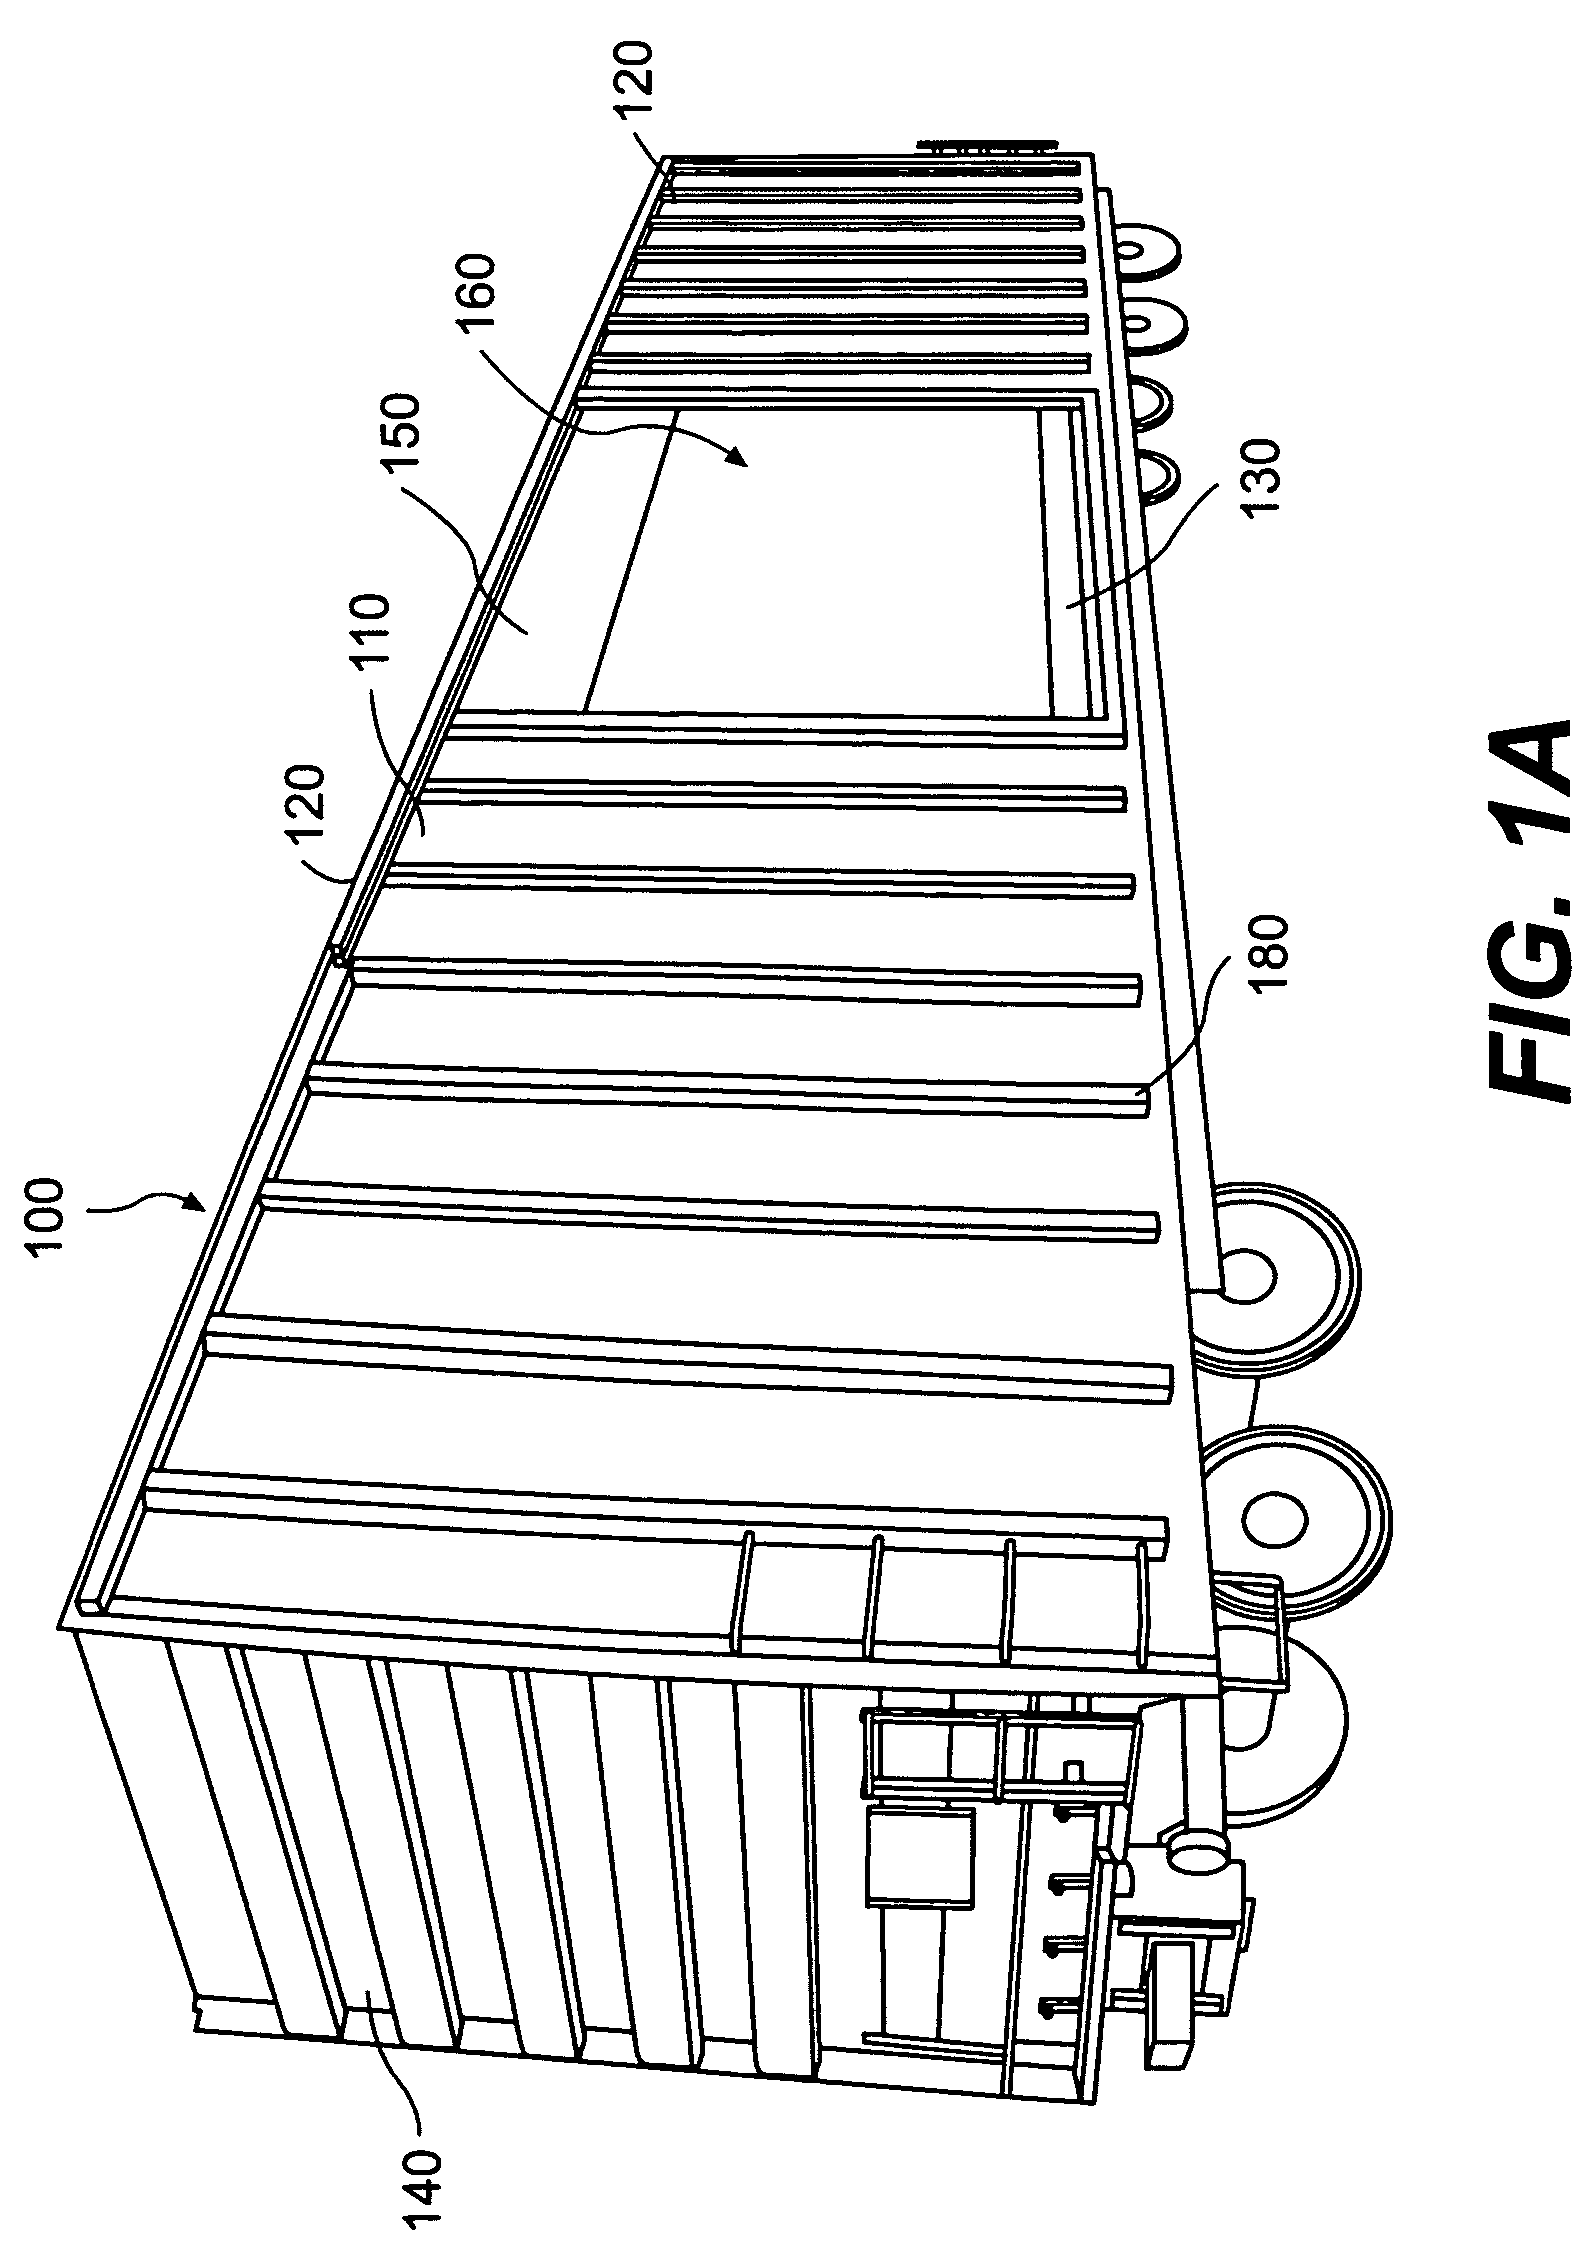 Insulated cargo containers